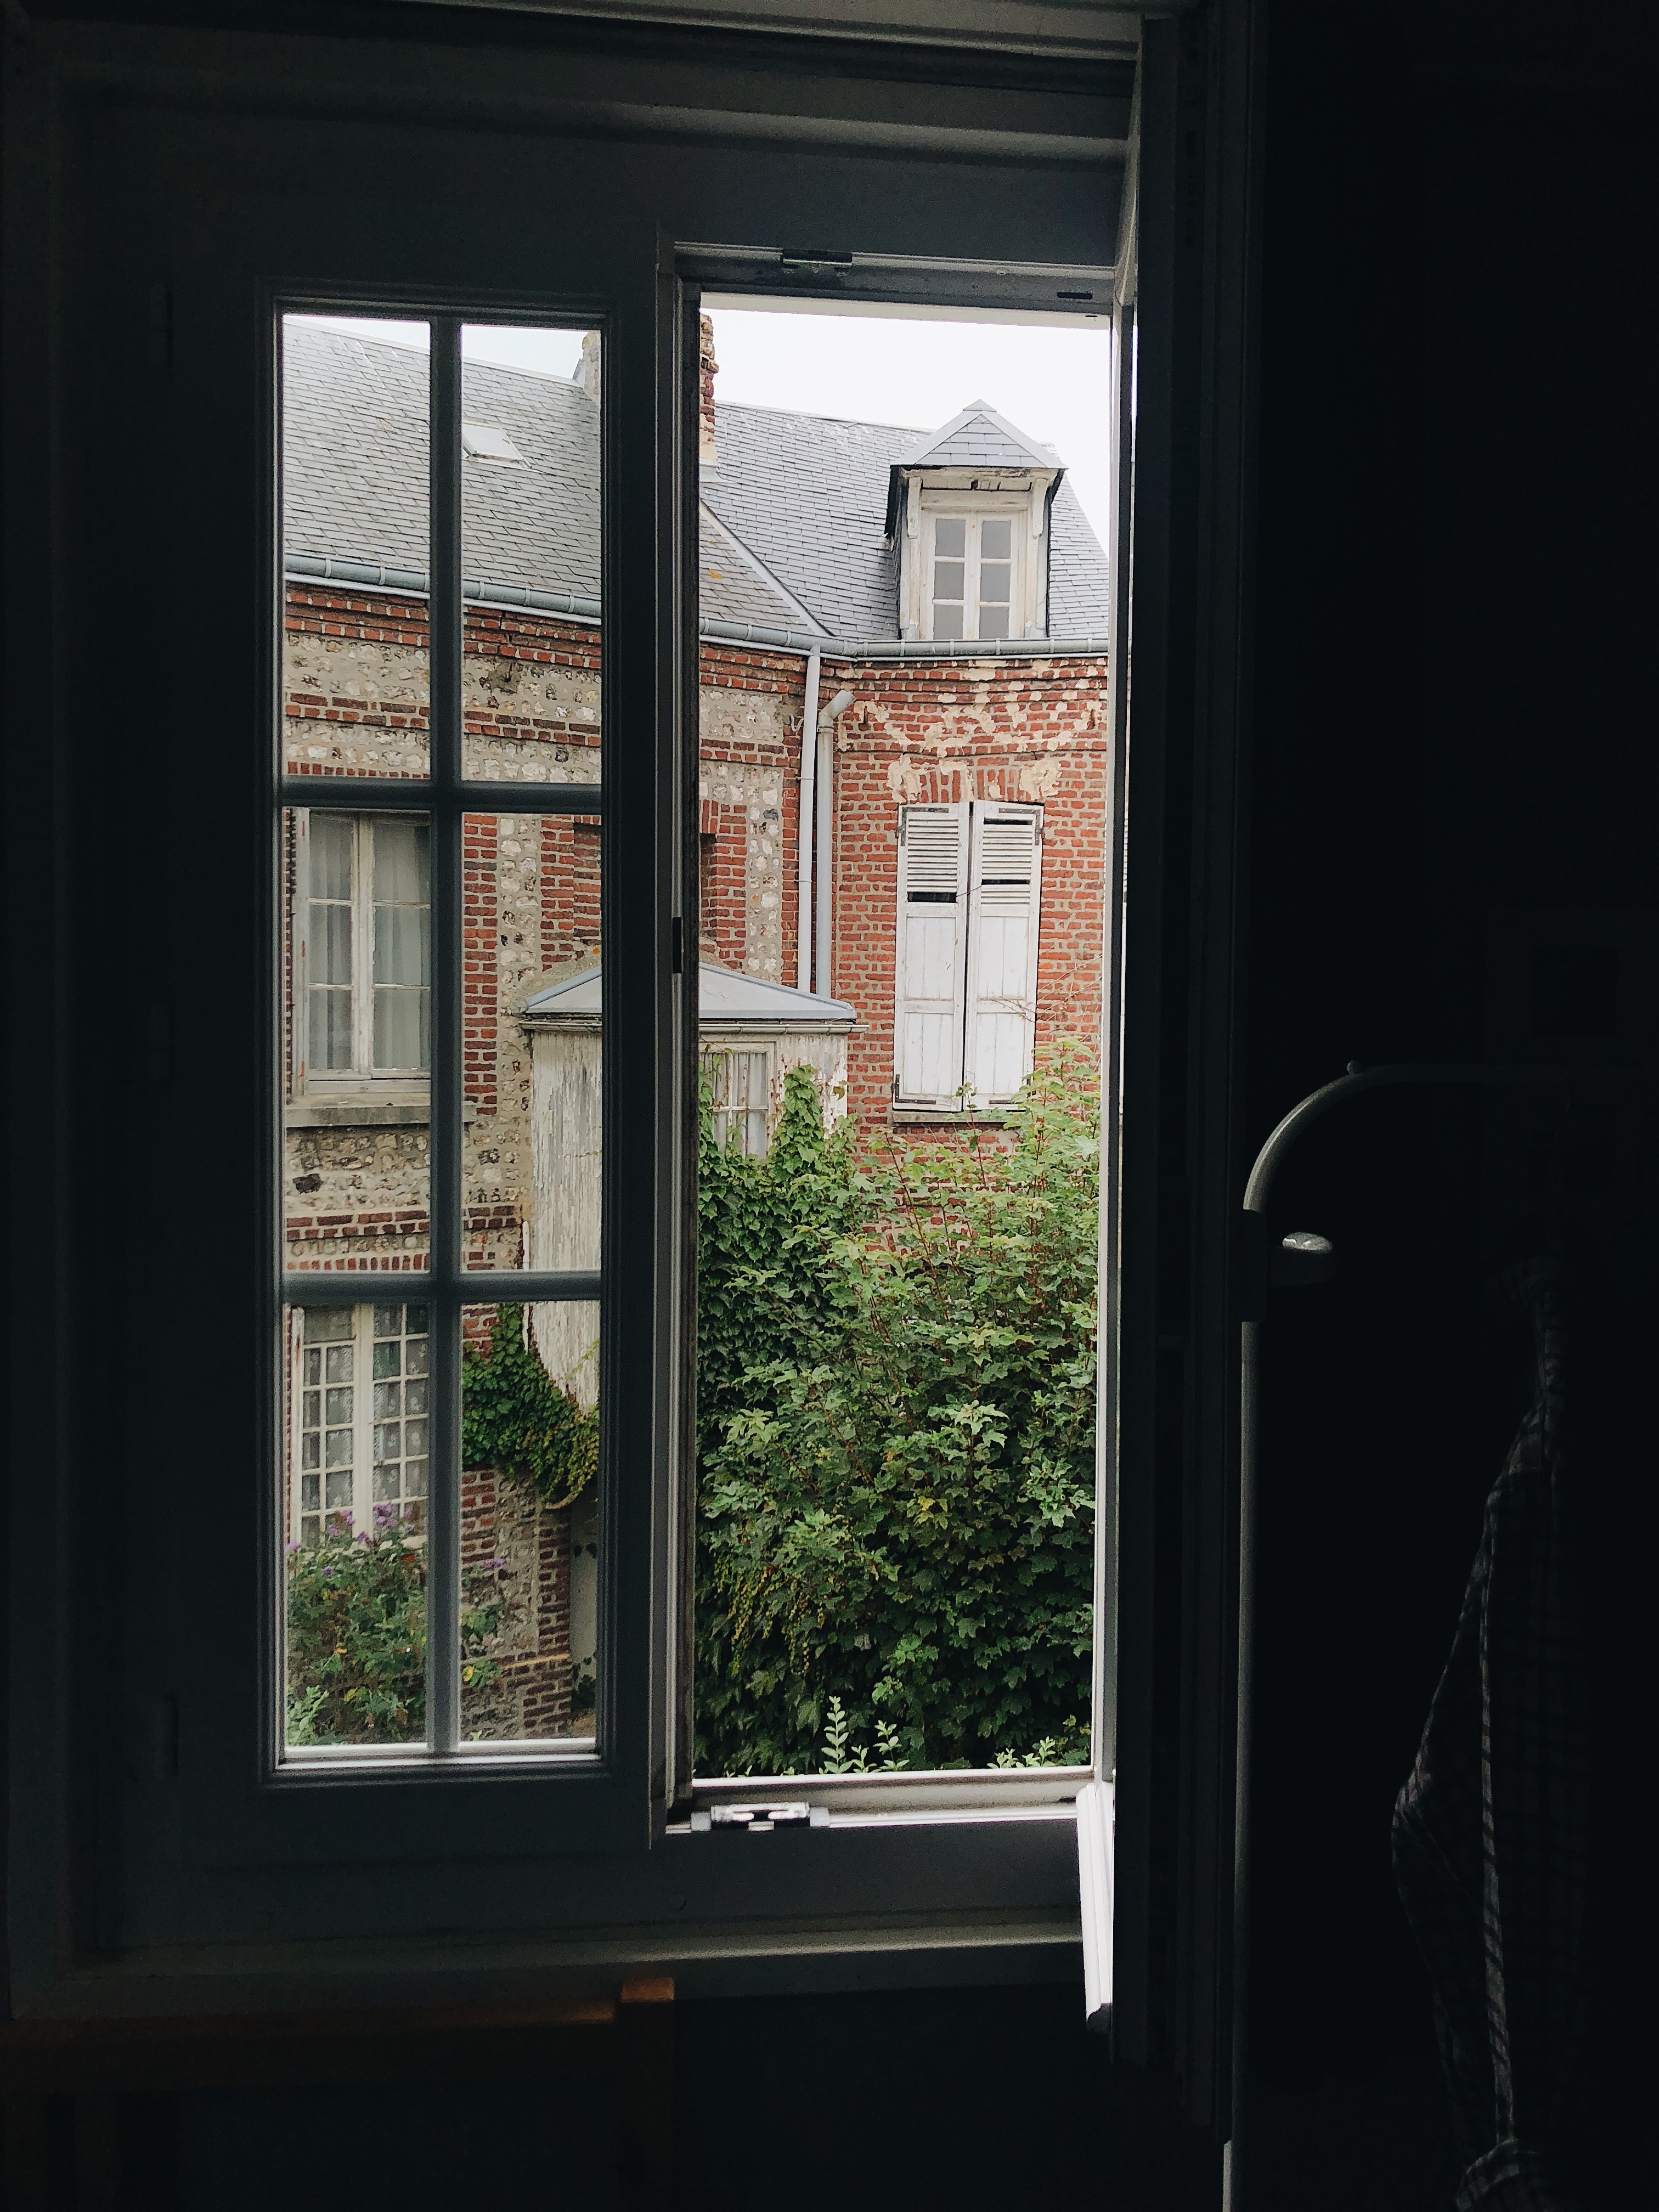 An open window overlooking a red building